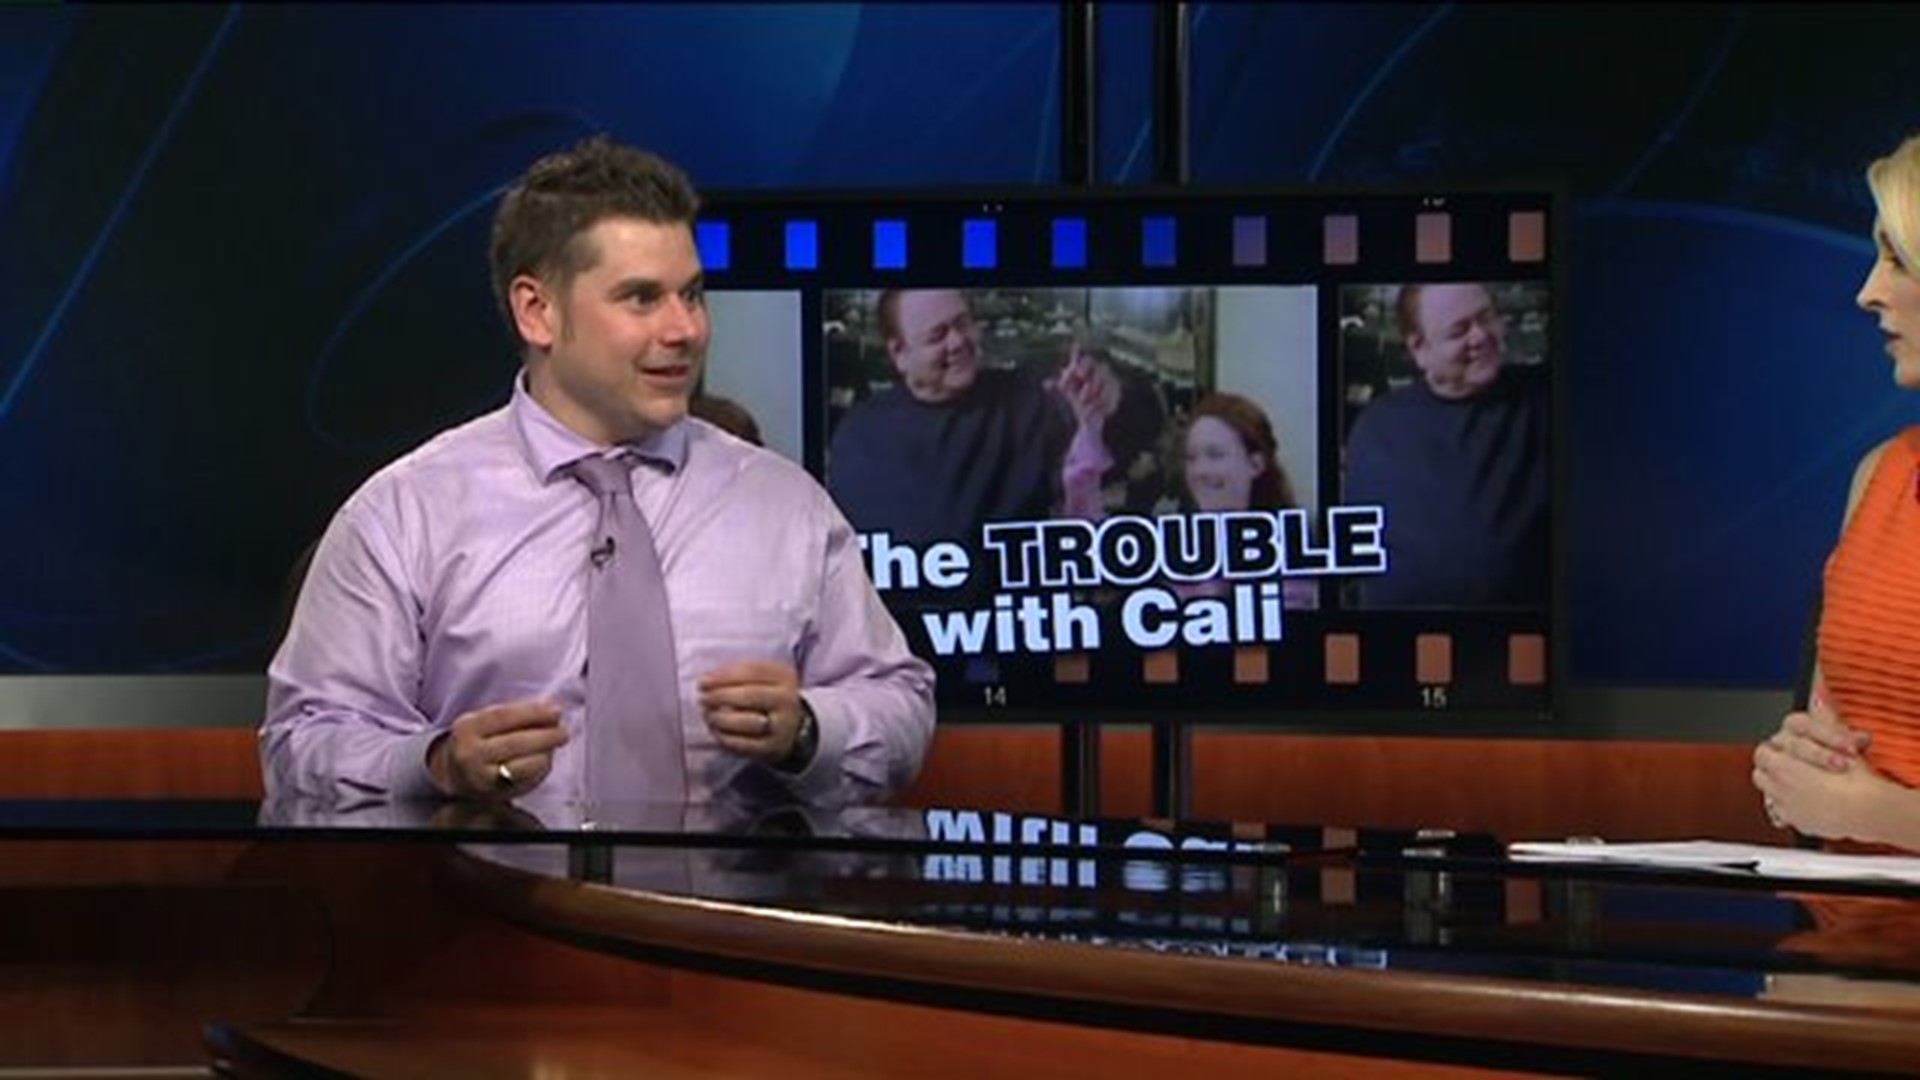 A Critic's Review of 'The Trouble with Cali'